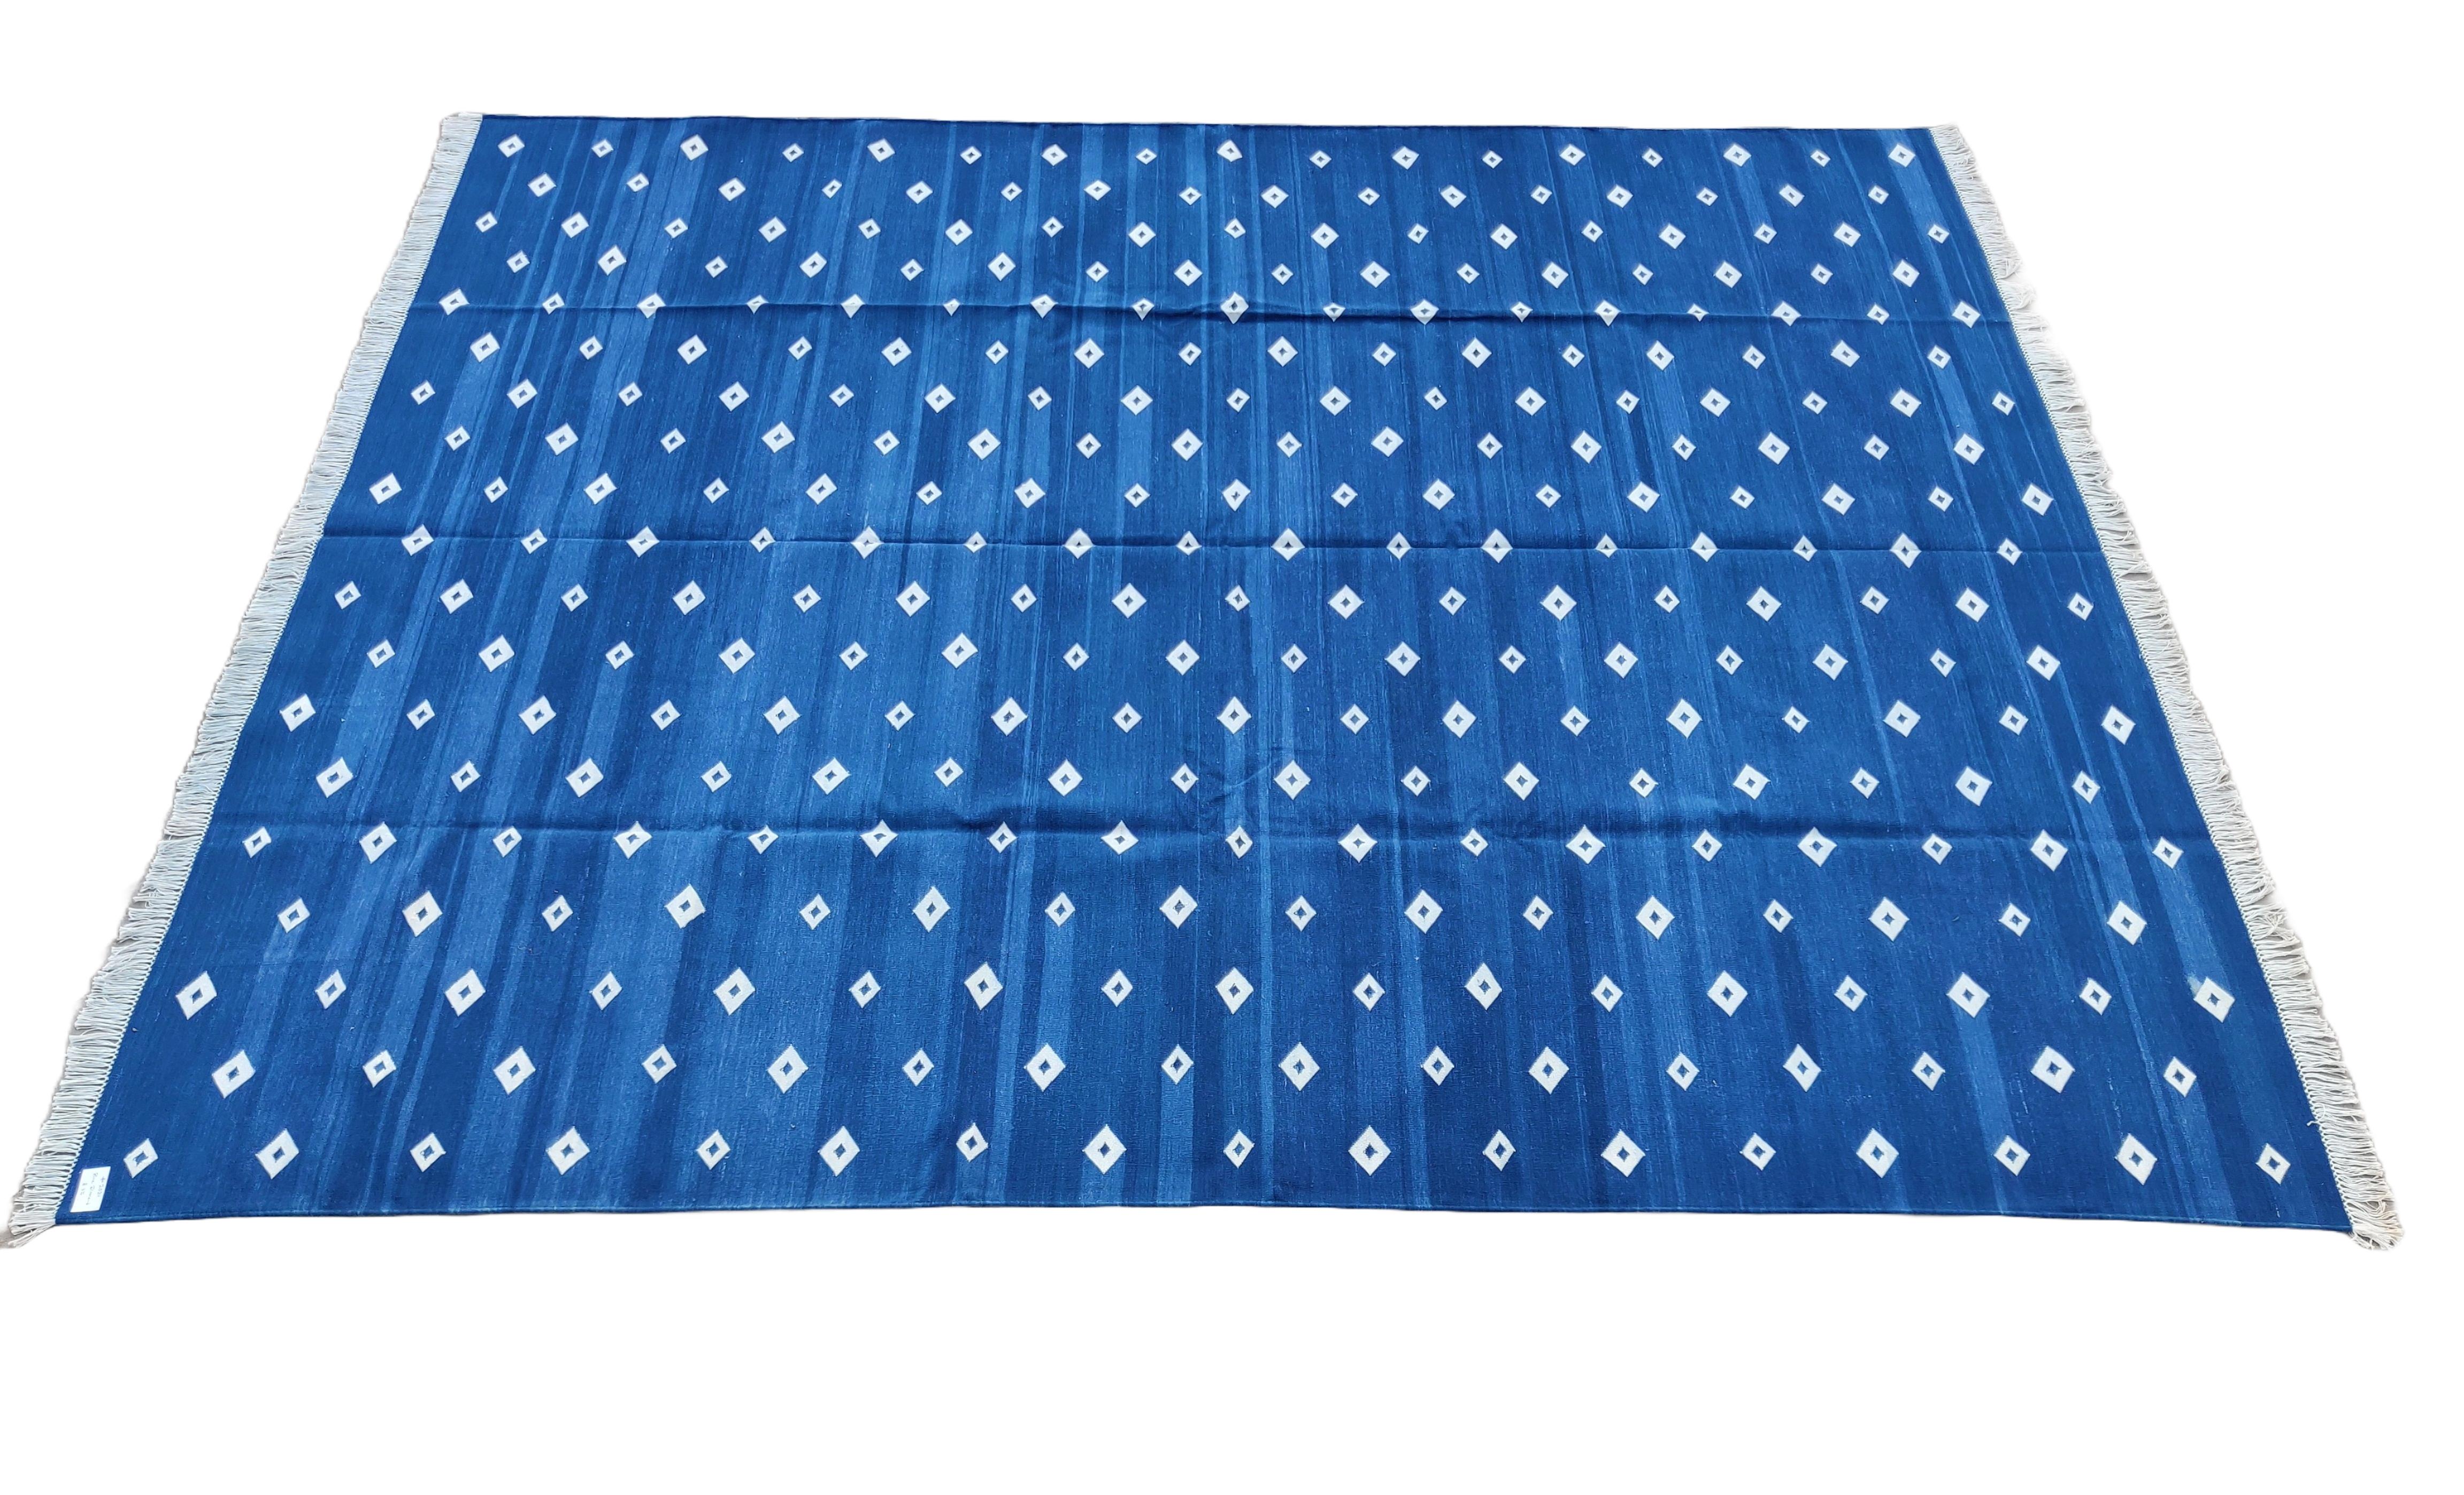 Mid-Century Modern Handmade Cotton Area Flat Weave Rug, Blue & White Diamond Pattern Indian Dhurrie For Sale